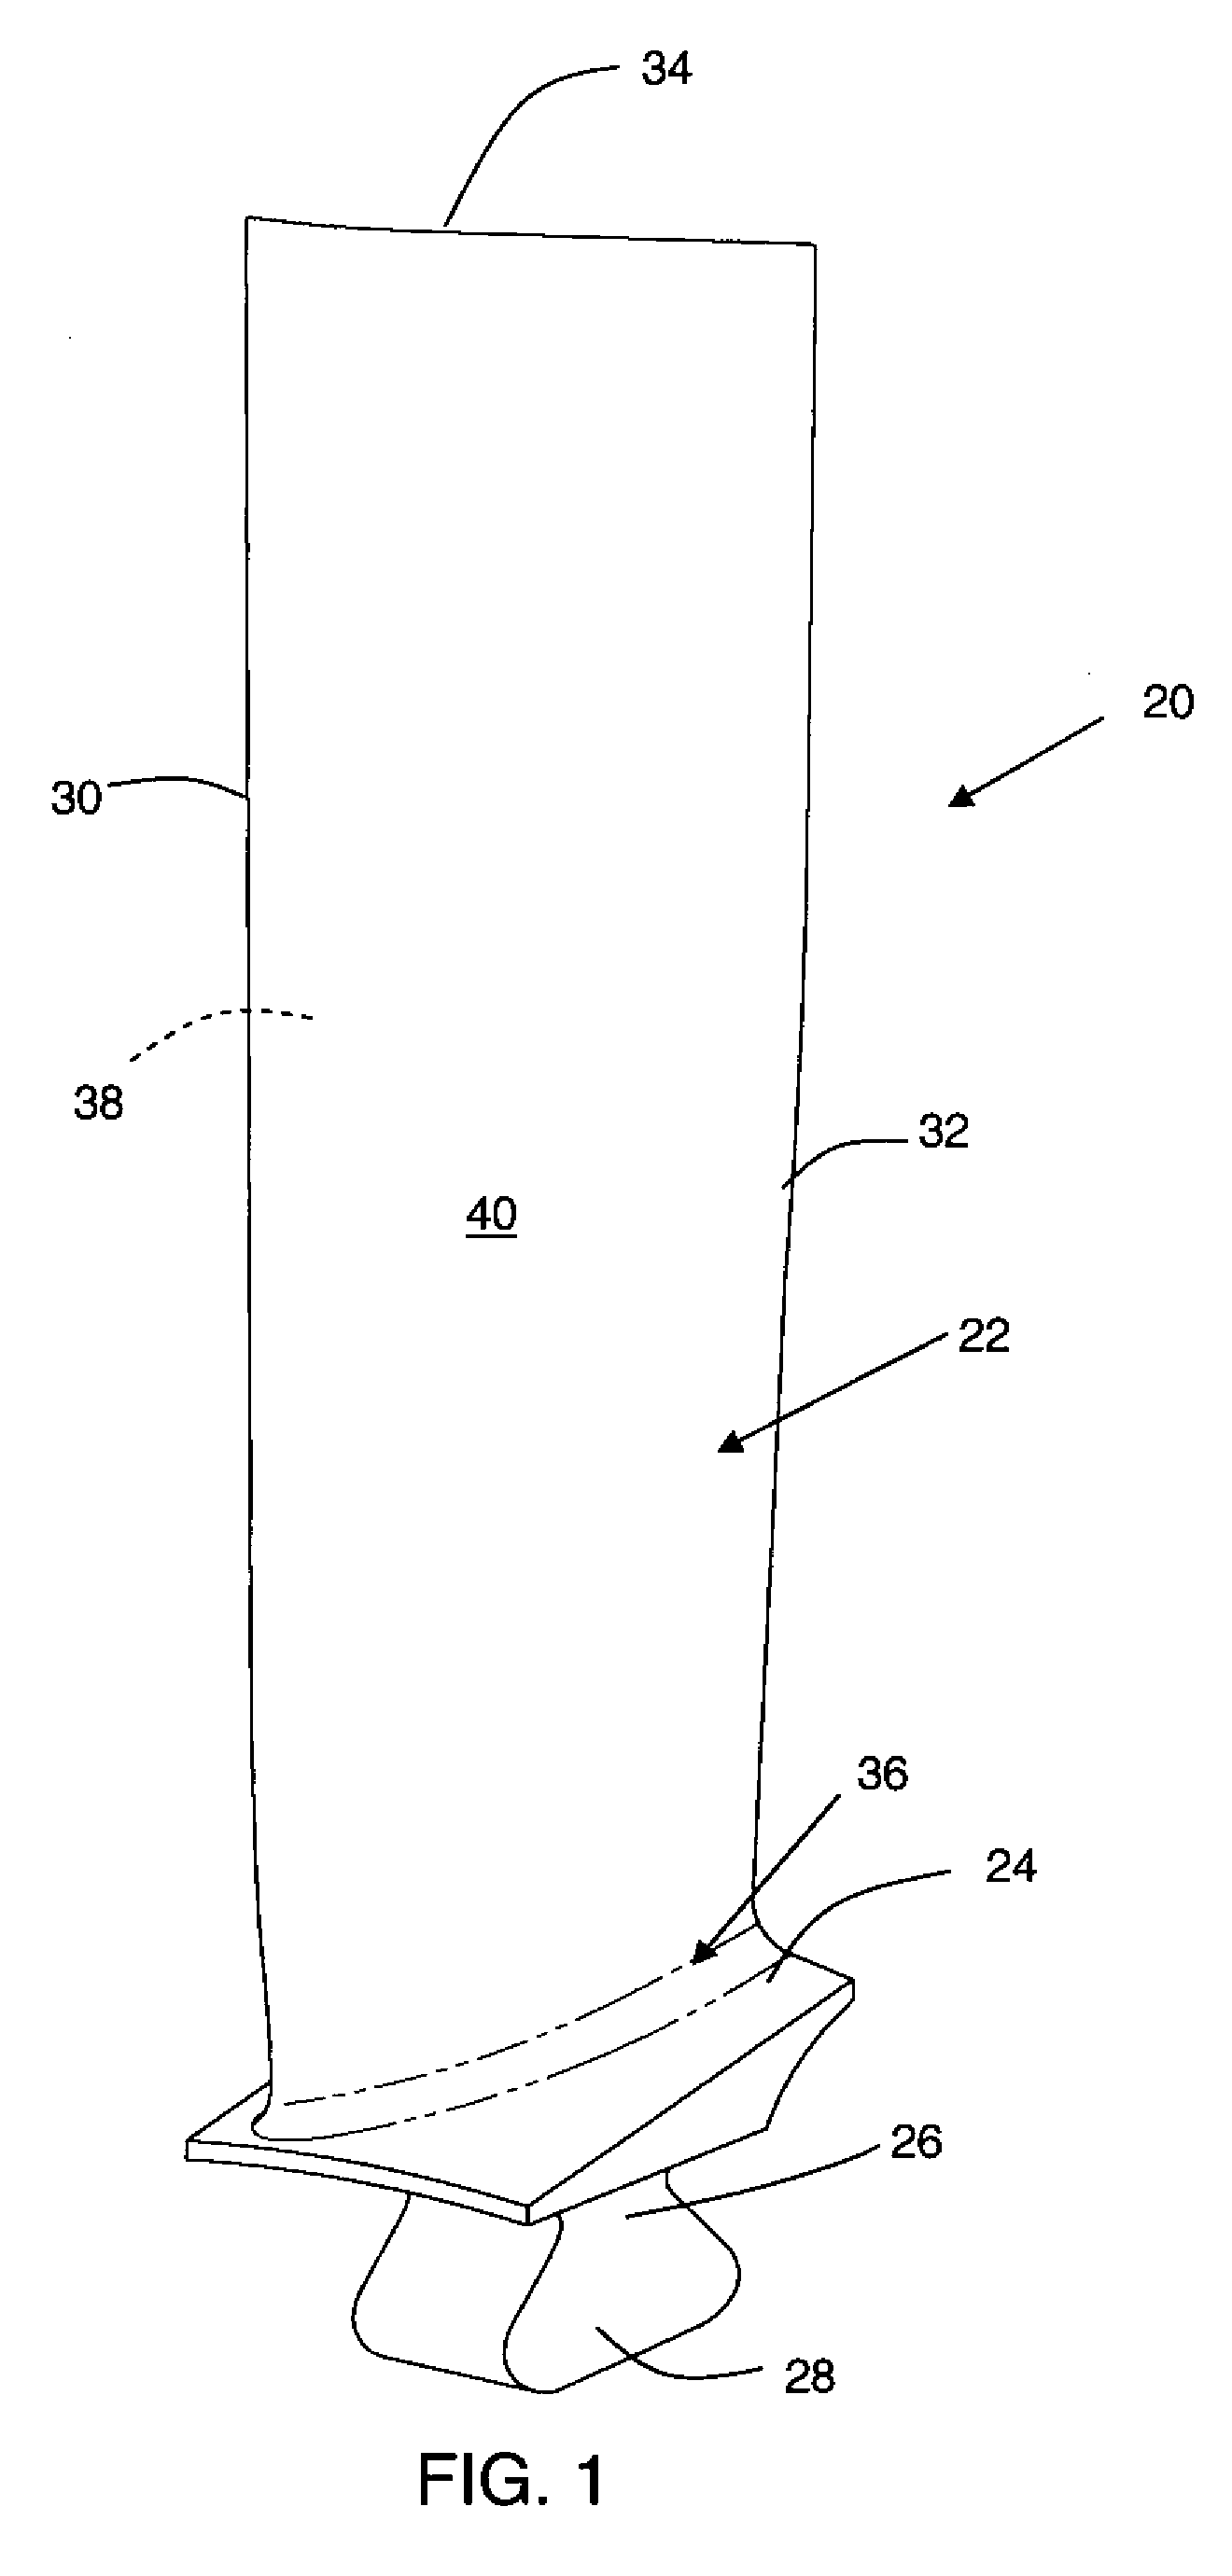 Method for increasing fatigue notch capability of airfoils